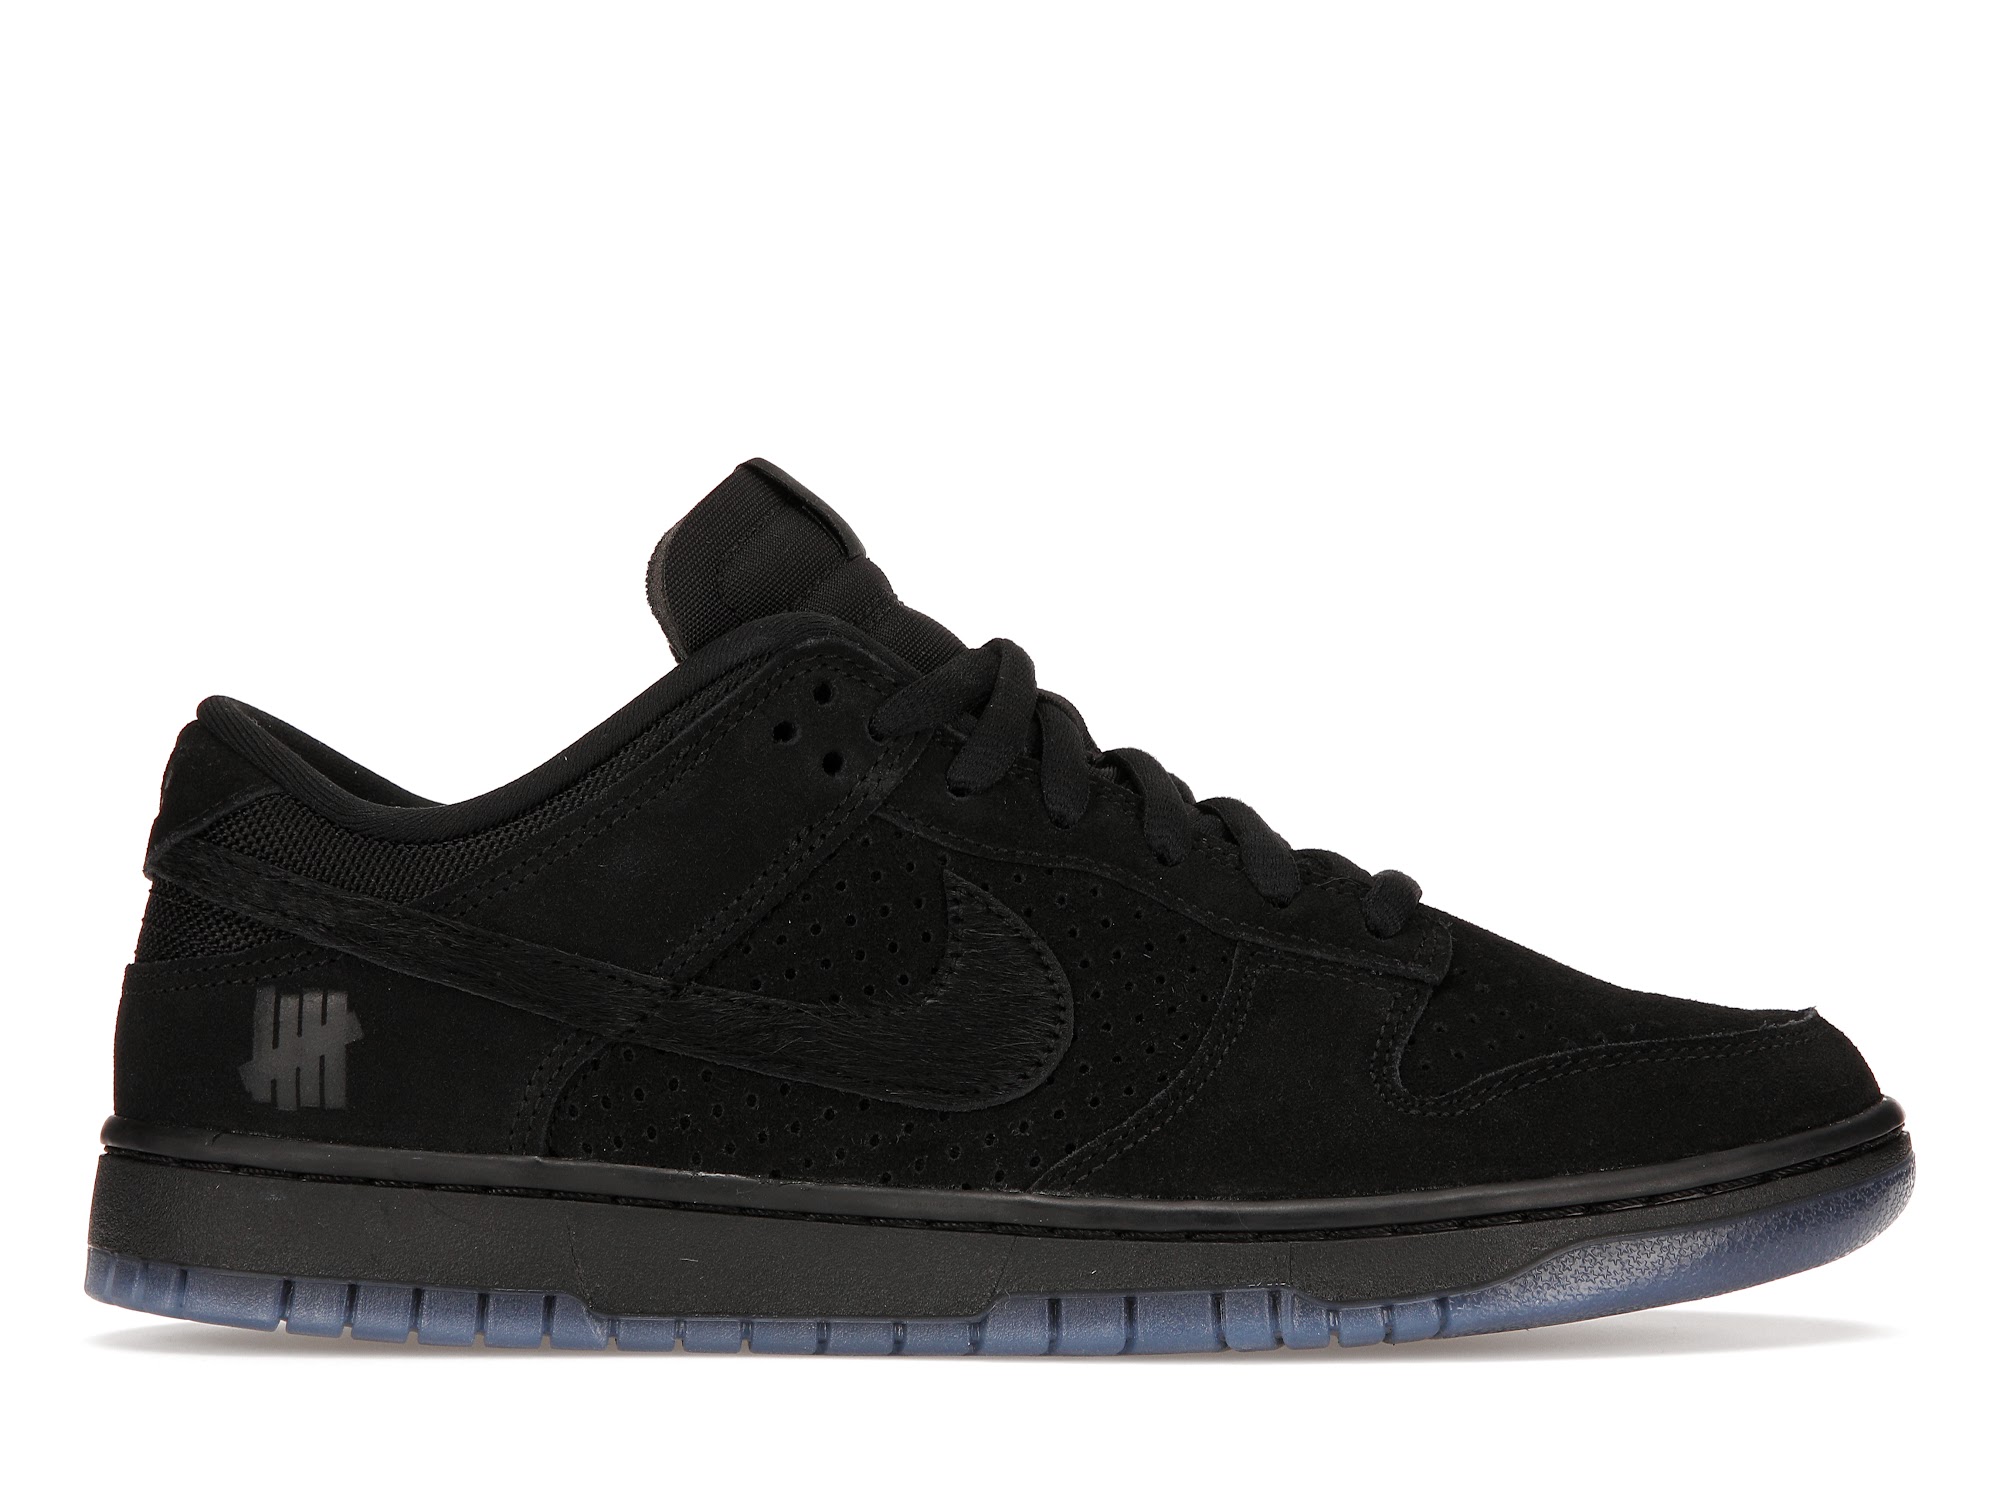 UNDEFEATED × NIKE DUNK LOW SP "5 ON IT"